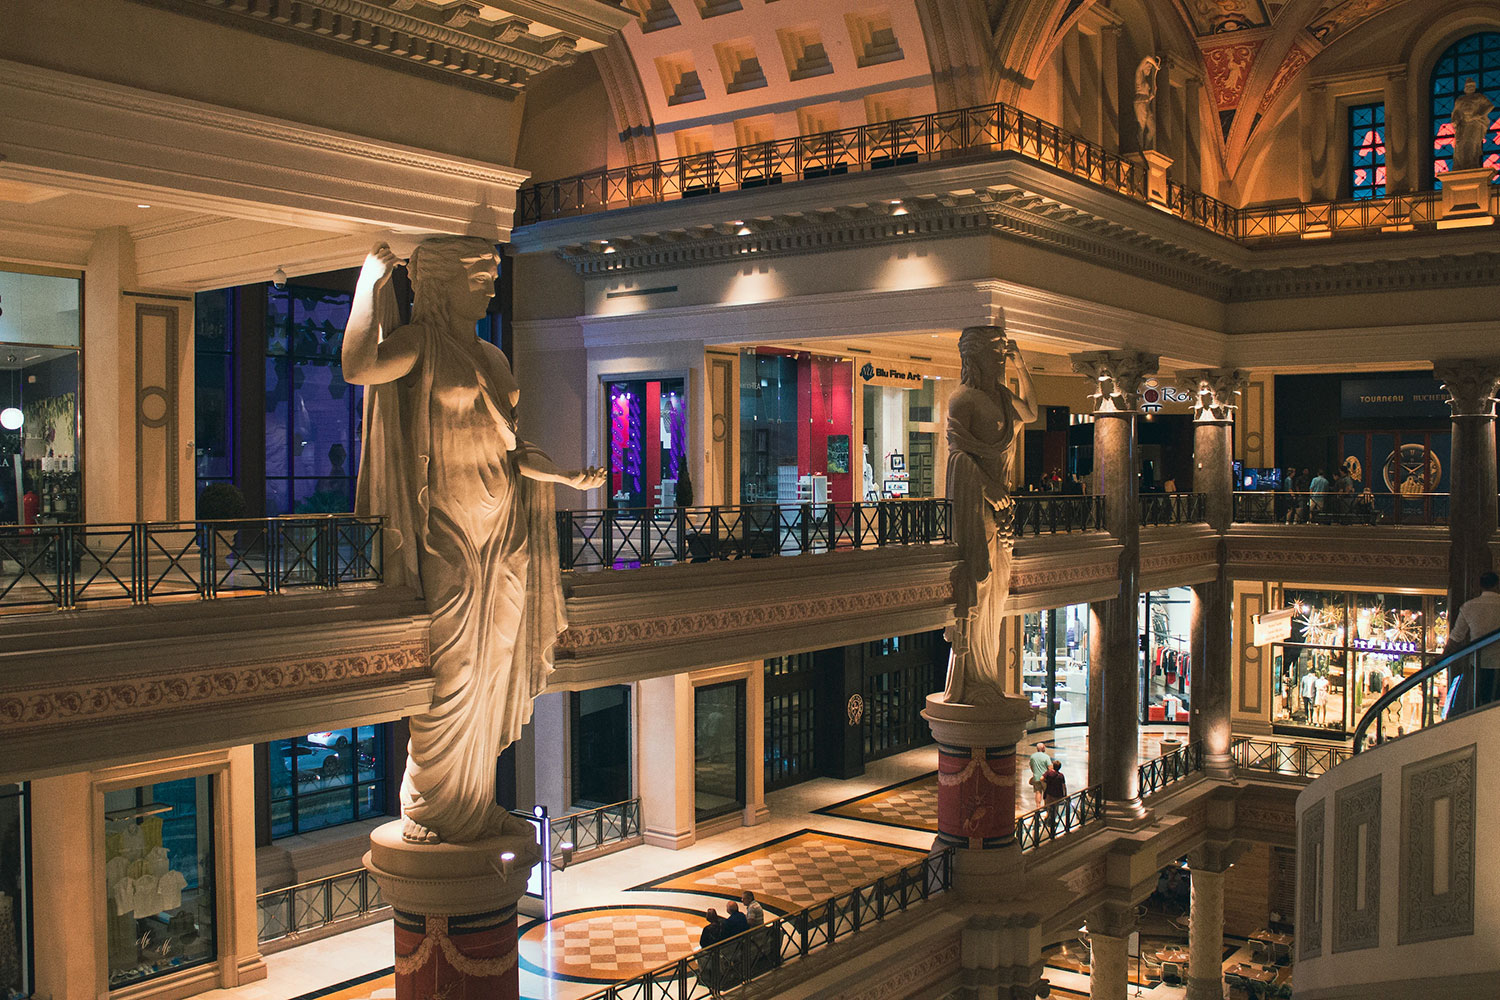 Caesars Palace in Las Vegas paid millions of dollars to prevent the spread of stolen data